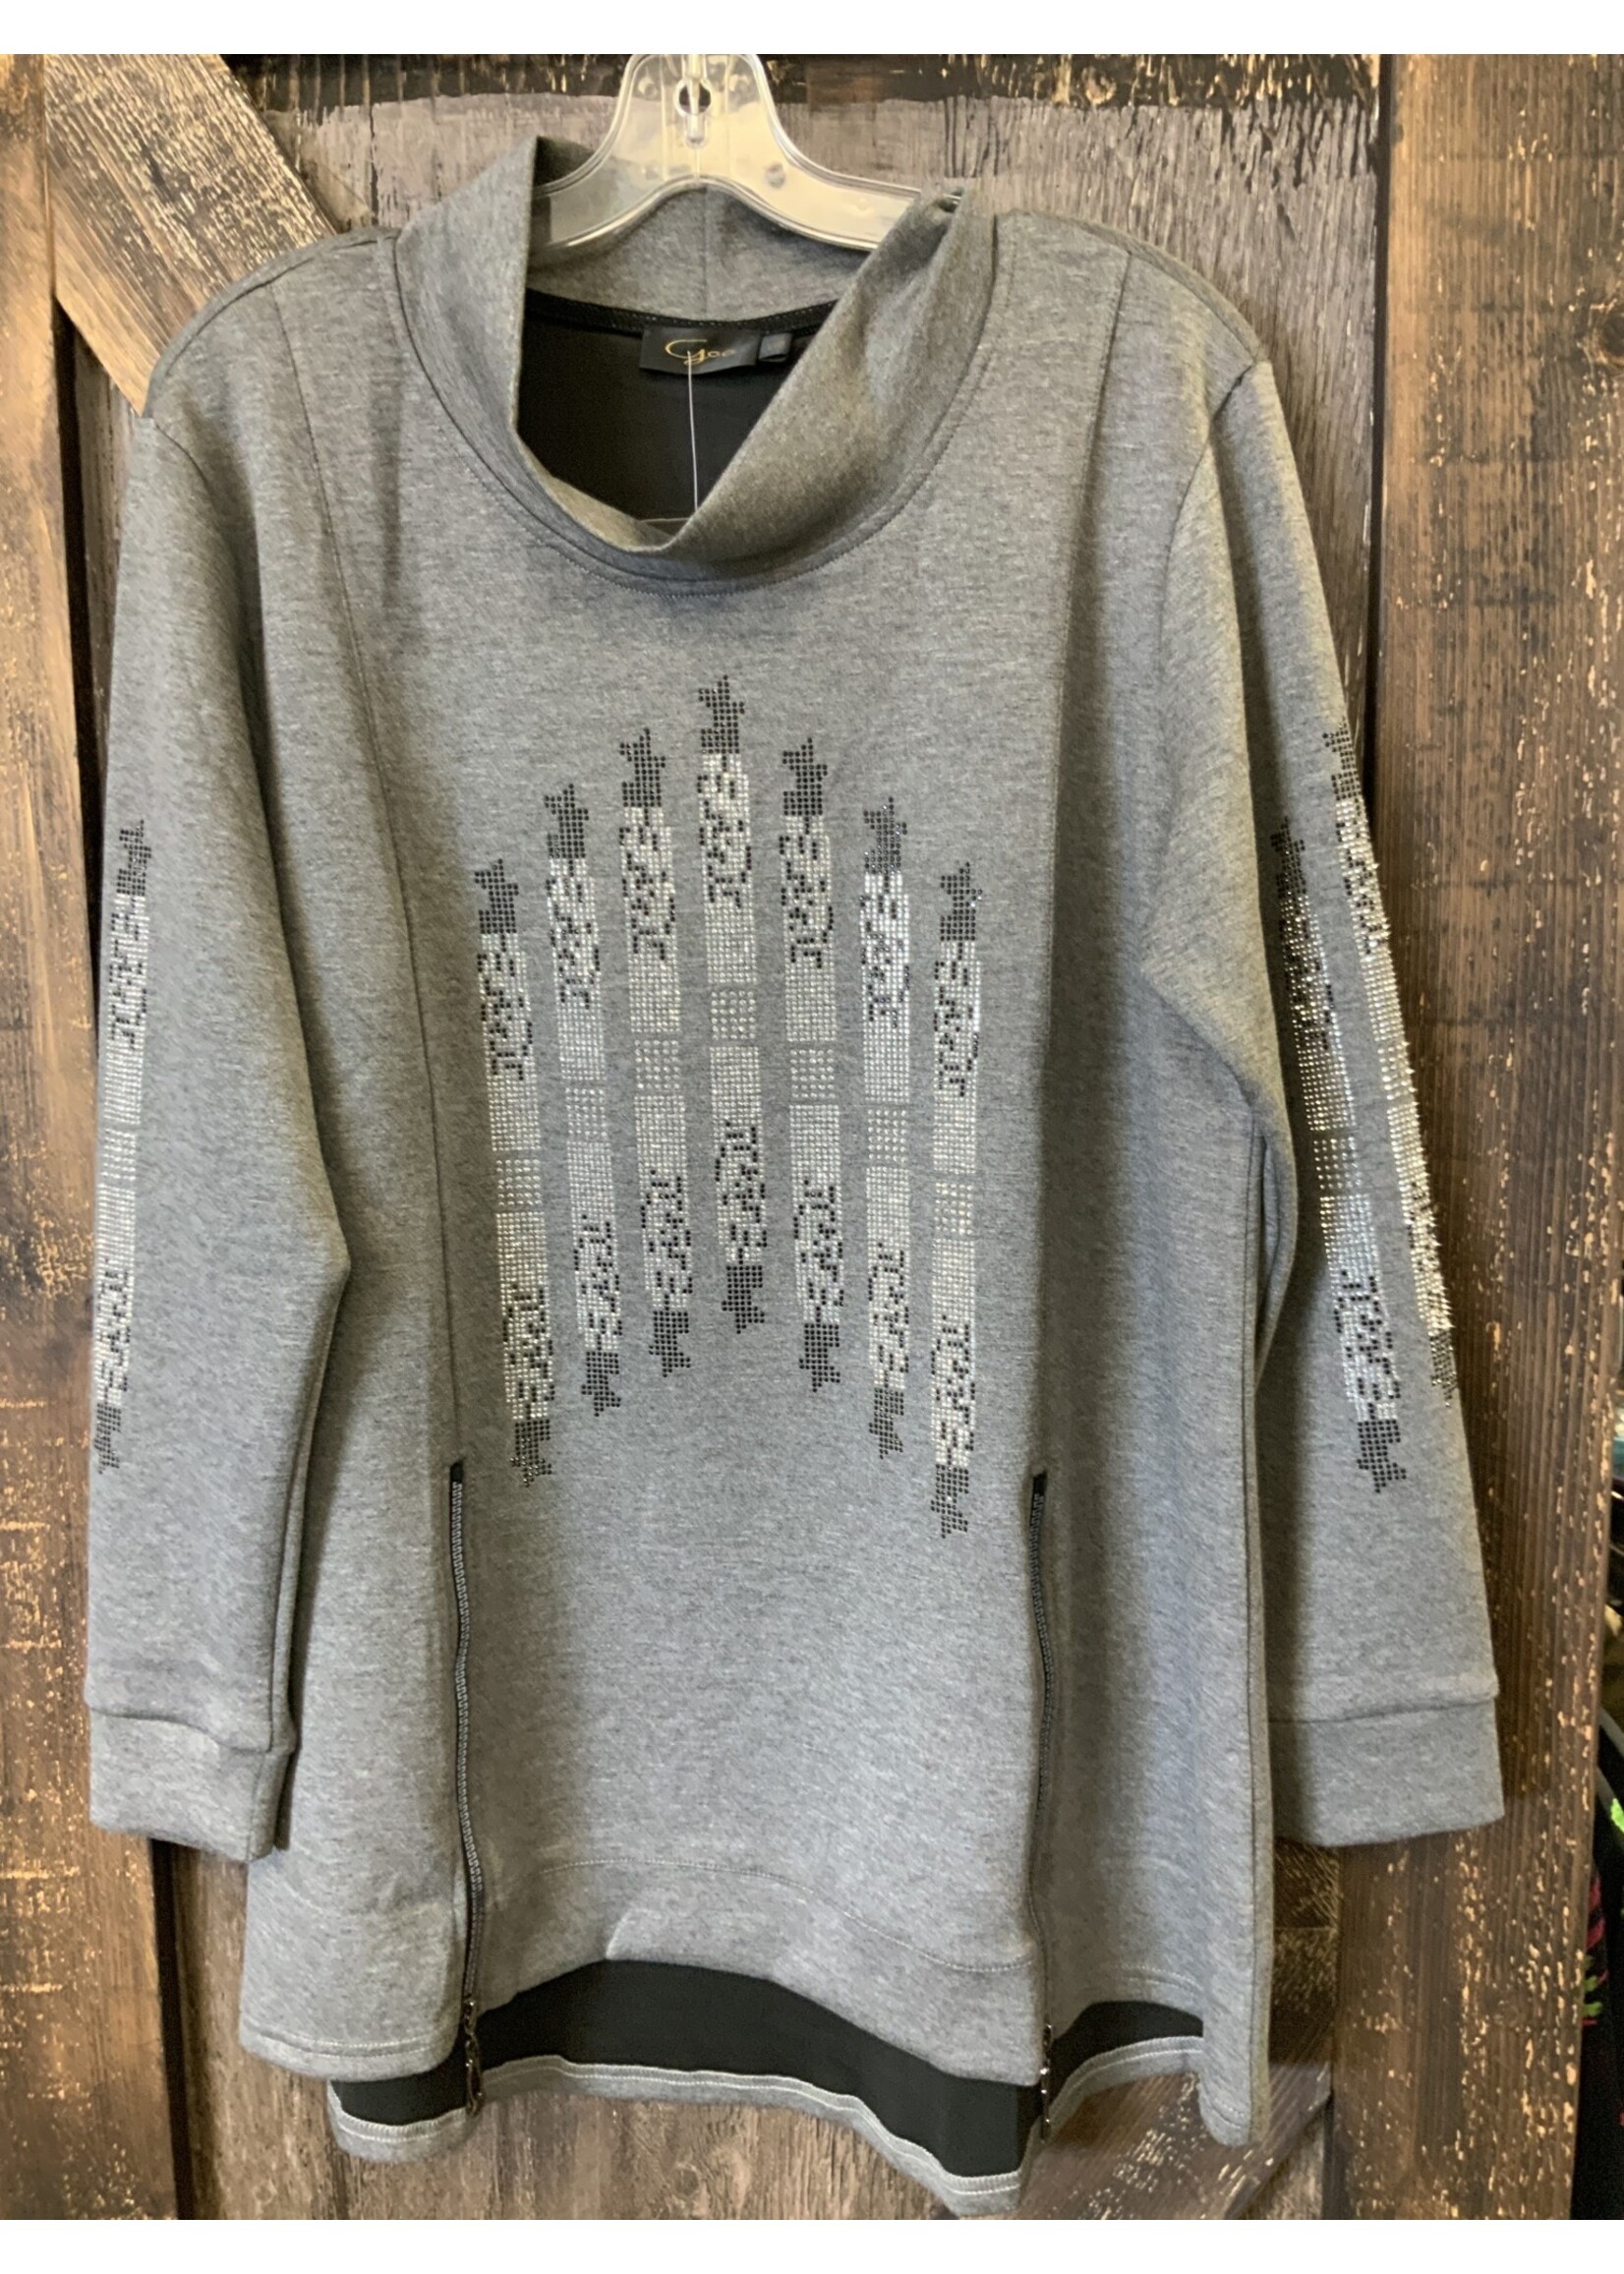 LADIES GREY L/S WITH BLING TOP